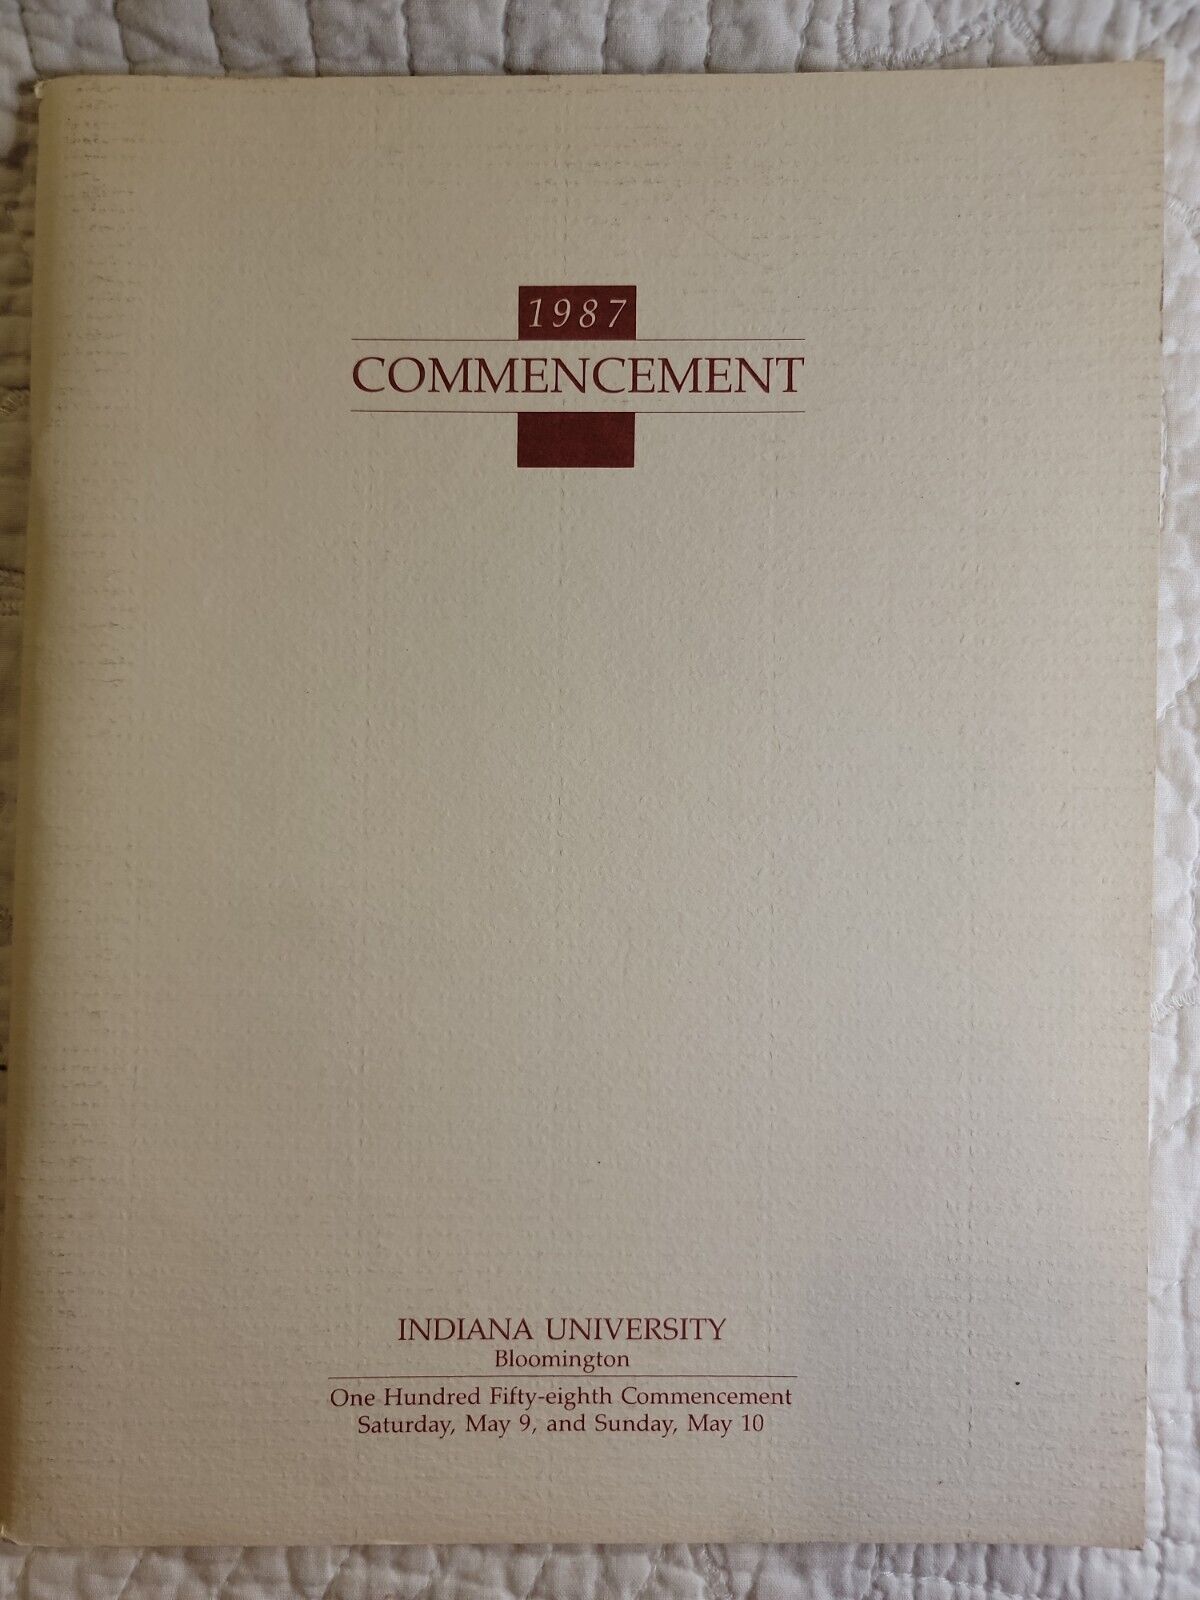 Indiana University Commencement Program 1987 Bloomington College with 8x10 photo